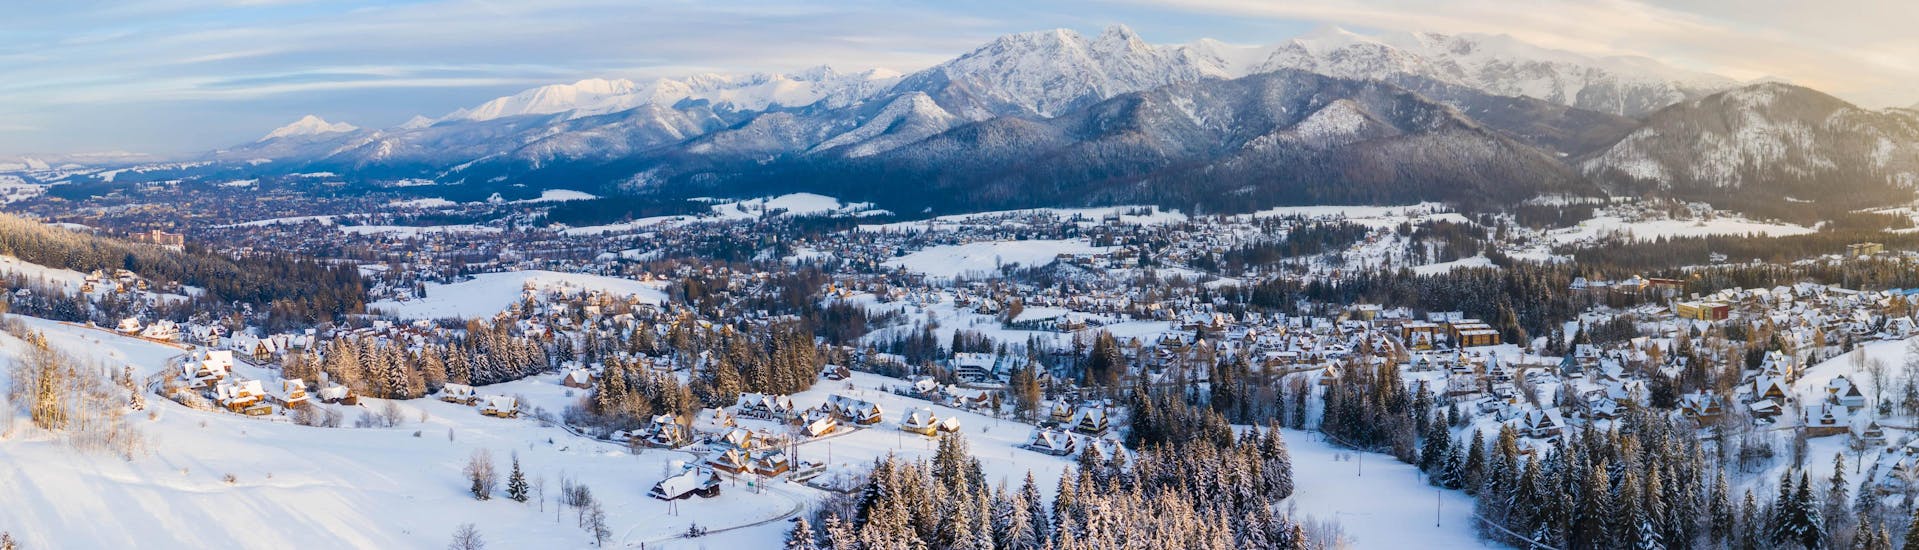 View of the snowy landscape of the village of Zakopane, where local ski schools offer their ski lessons.